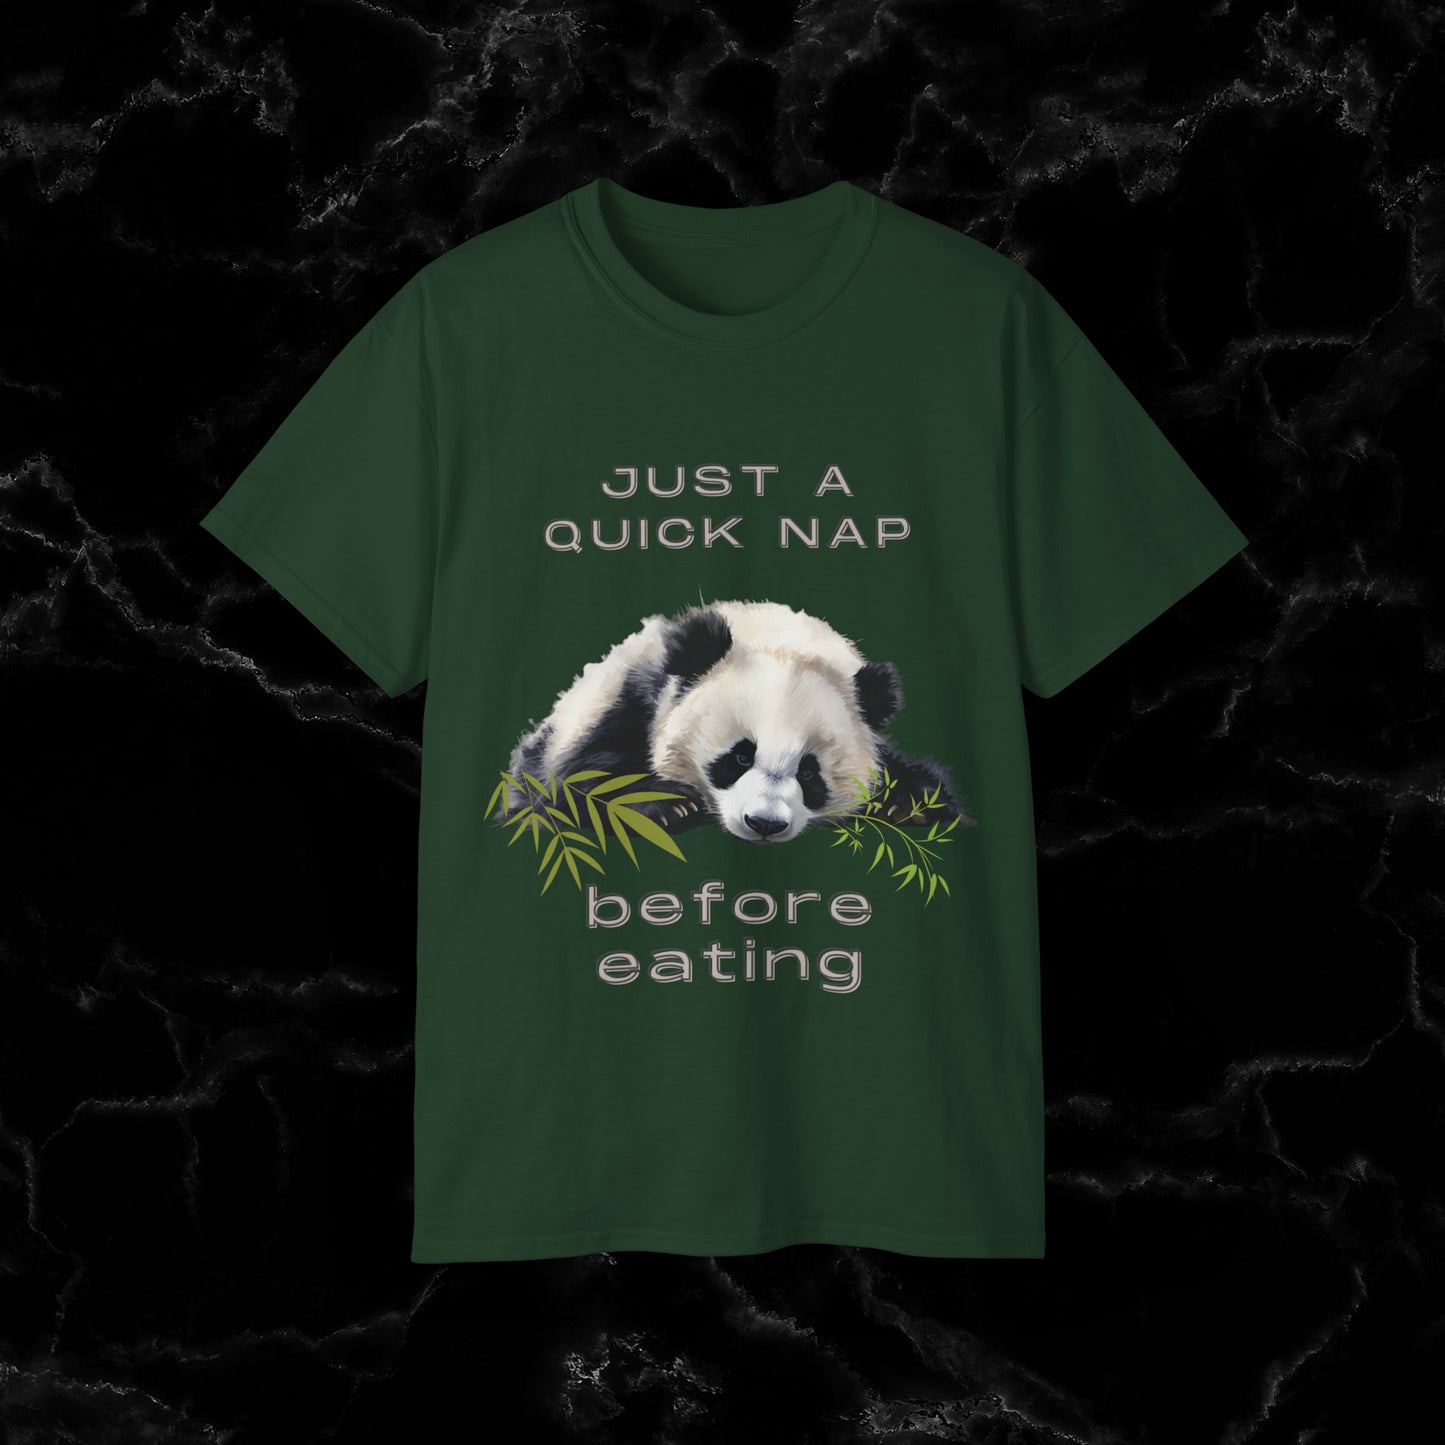 Nap Time Panda Unisex Funny Tee - Hilarious Panda Nap Design - Just a Quick Nap Before Eating T-Shirt Forest Green S 